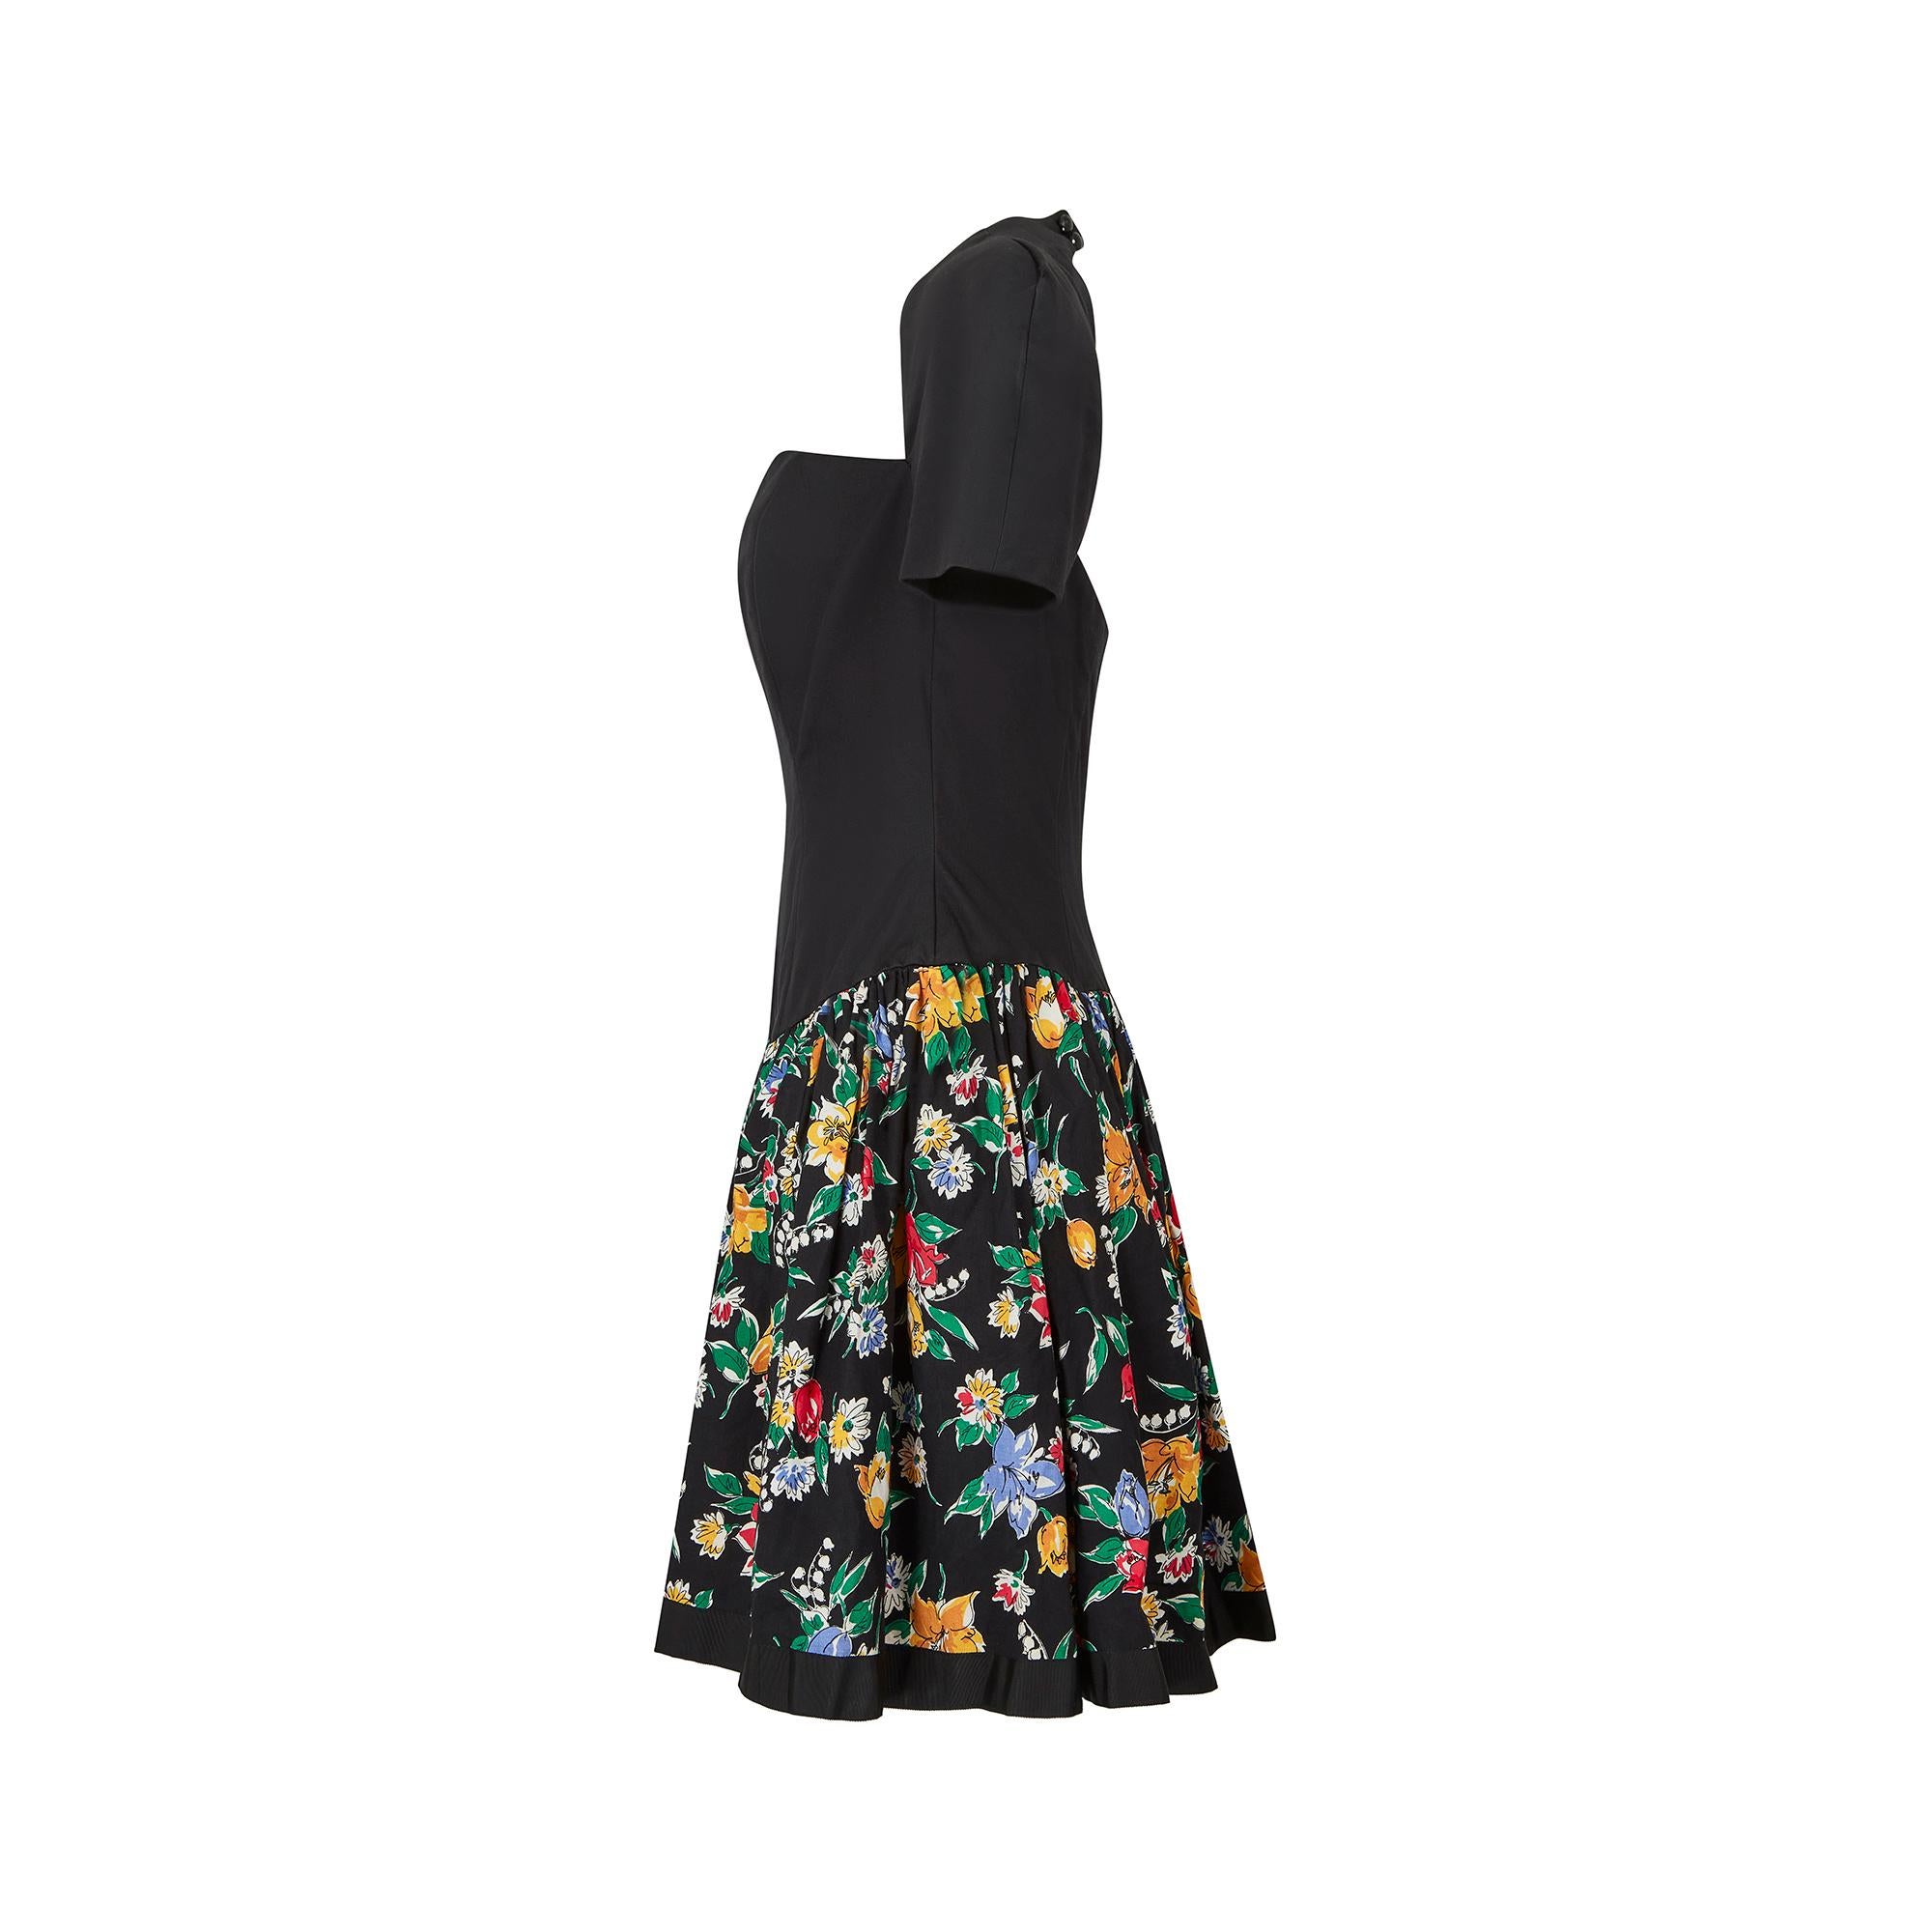 1980s Victor Costa Black and Floral Print Cotton Dress In Excellent Condition For Sale In London, GB